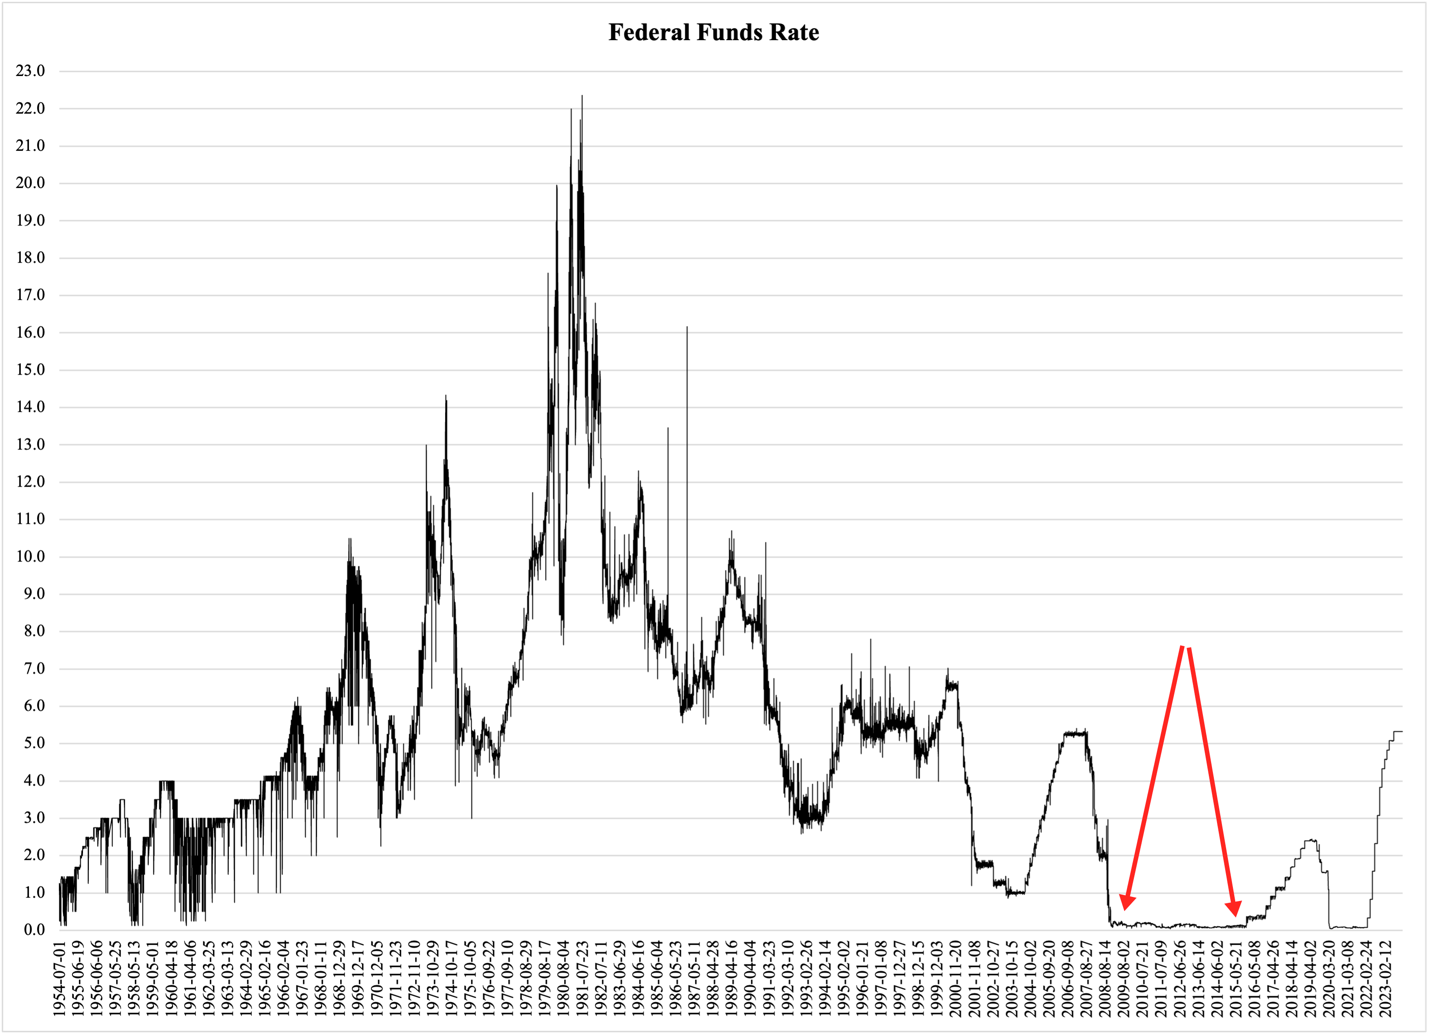 A graph showing the rate of the federal funds rate

Description automatically generated